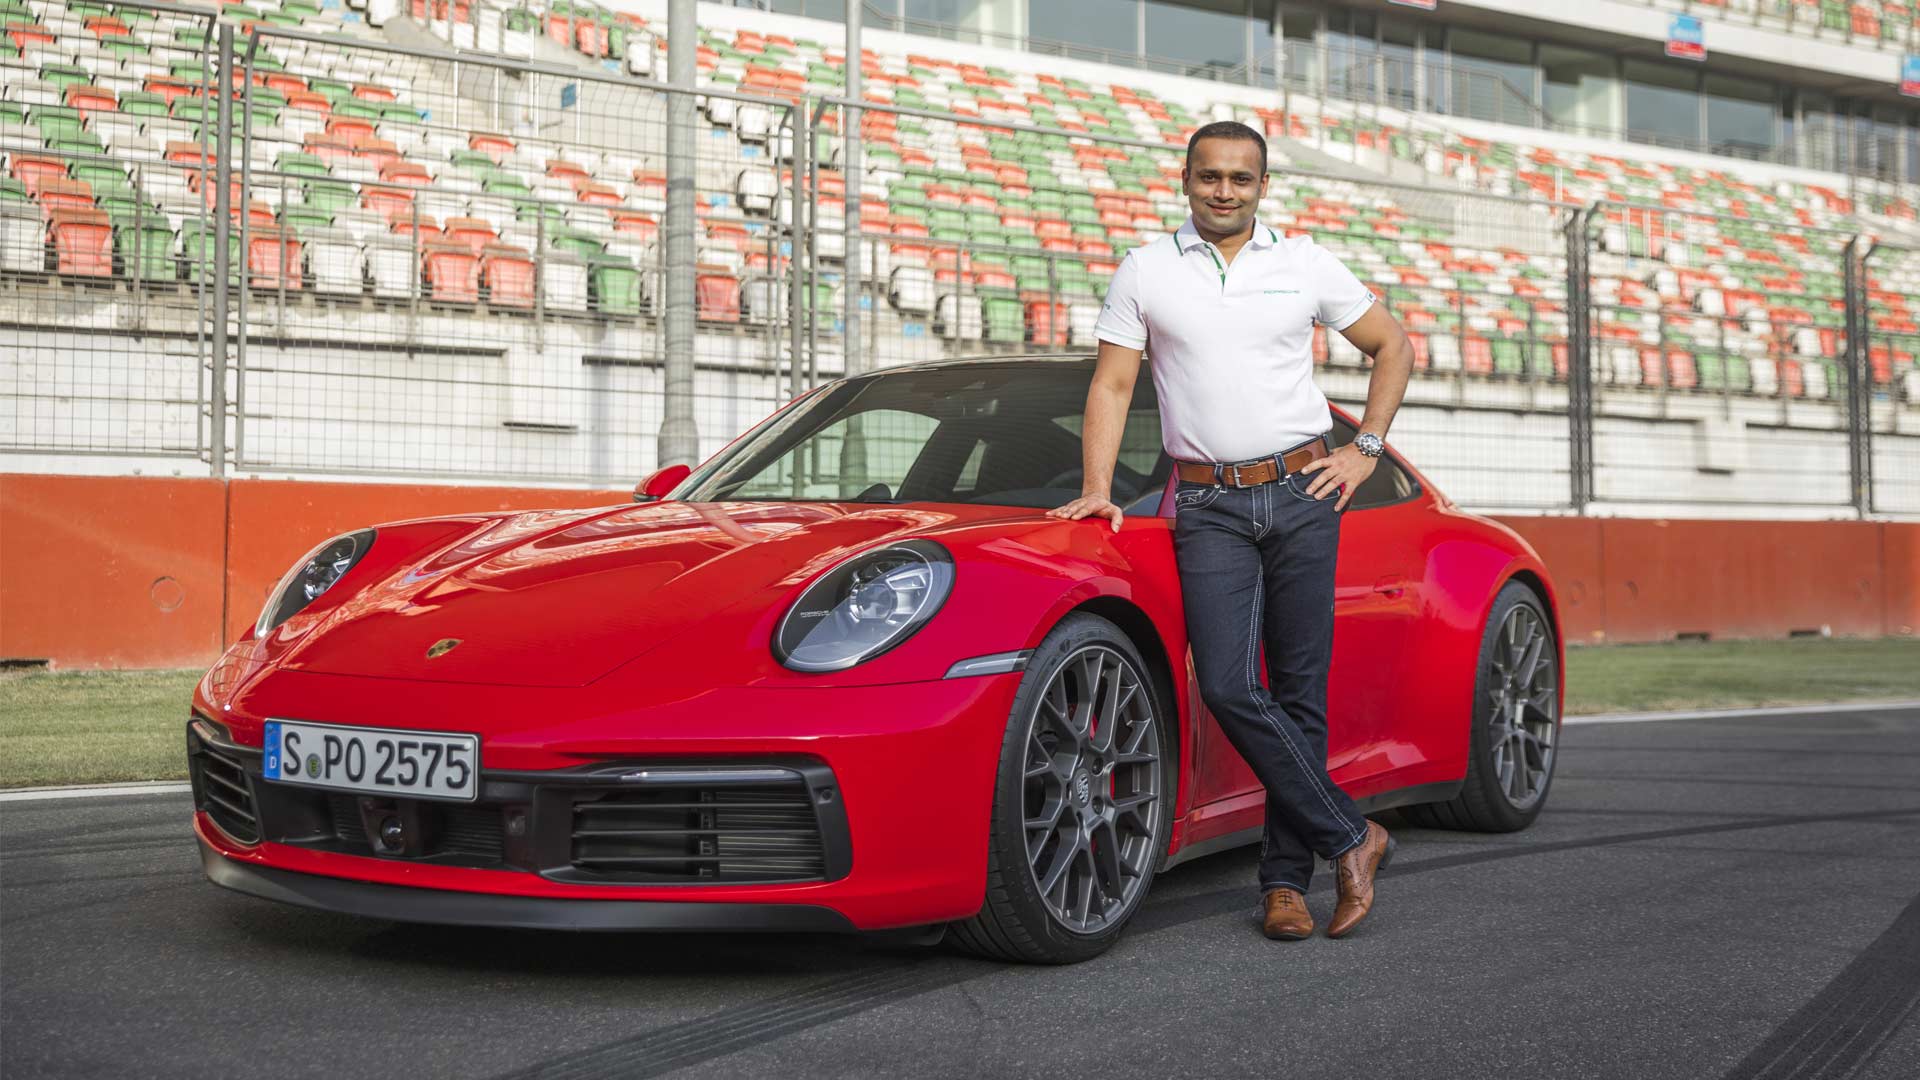 8th-generation-of-the-Porsche-911-India-launch-2019-Buddh-International-Circuit